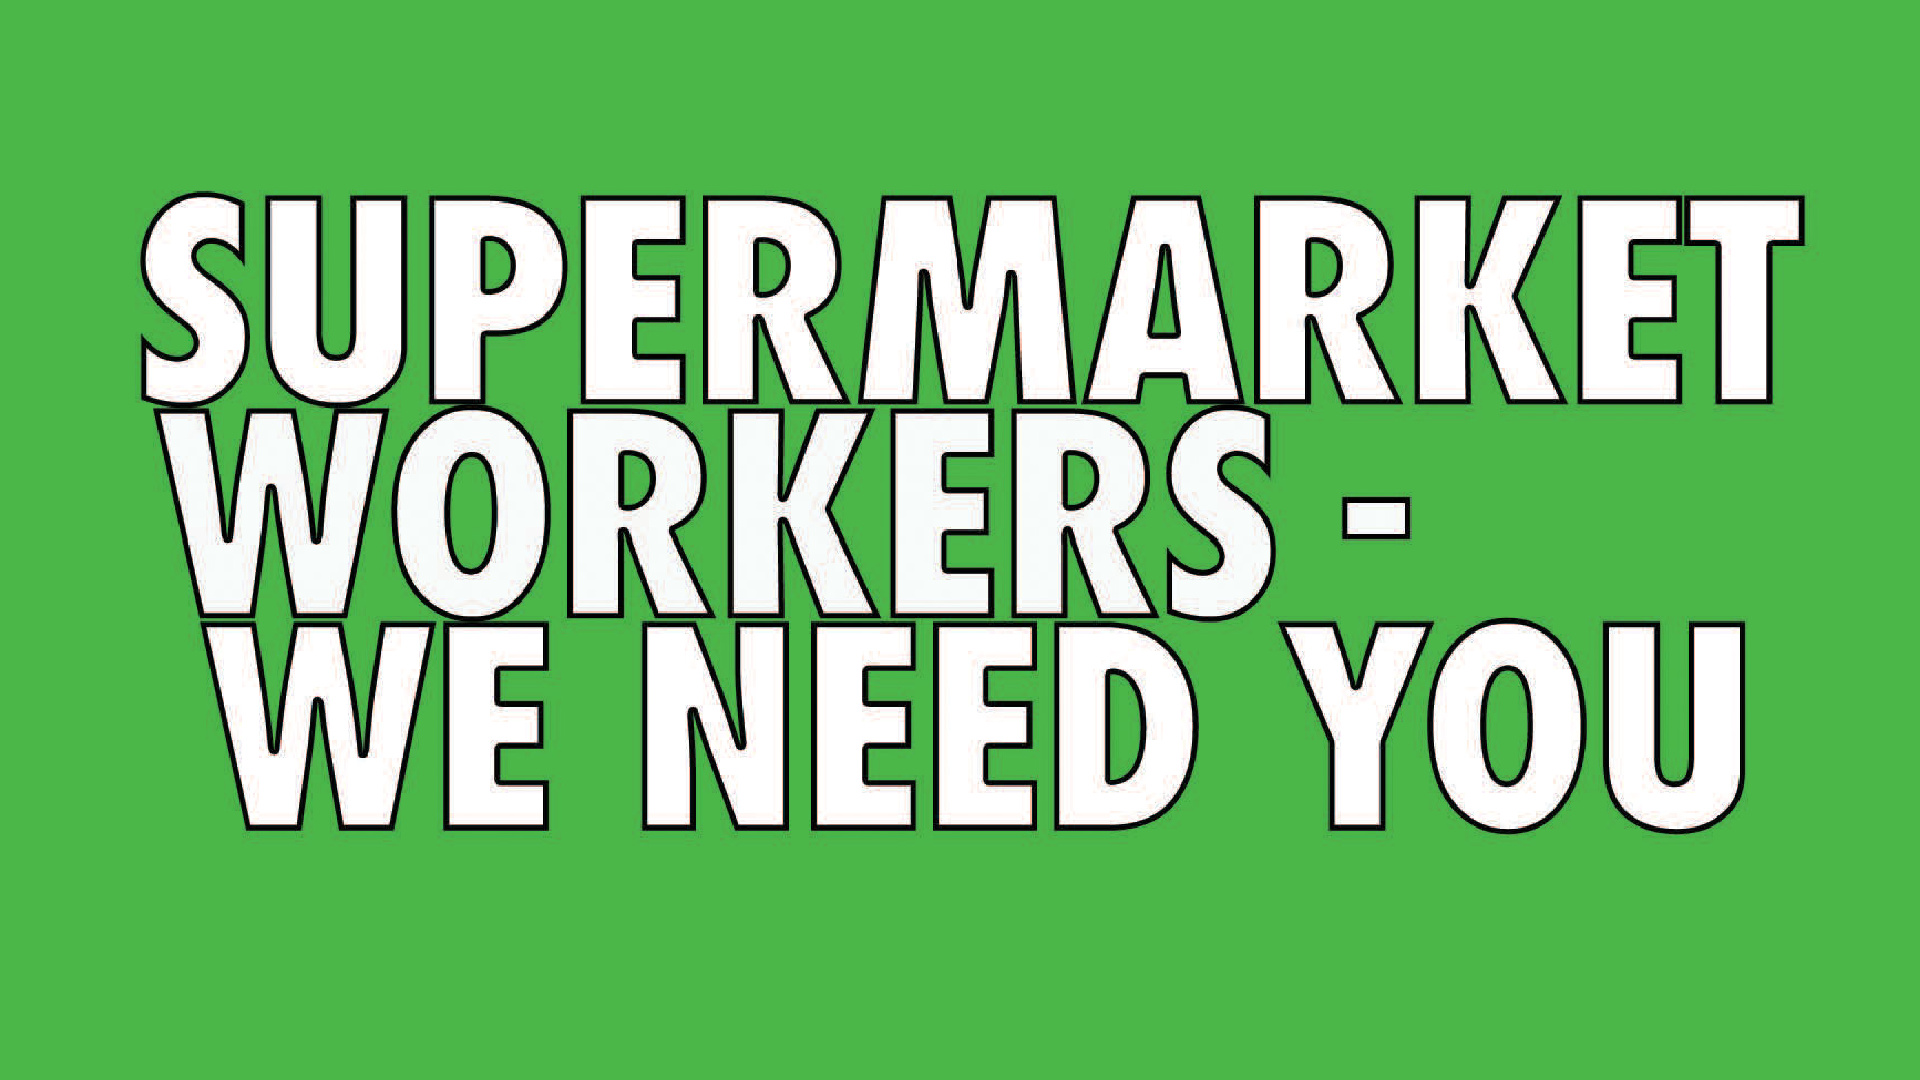 Supermarket workers – we need you